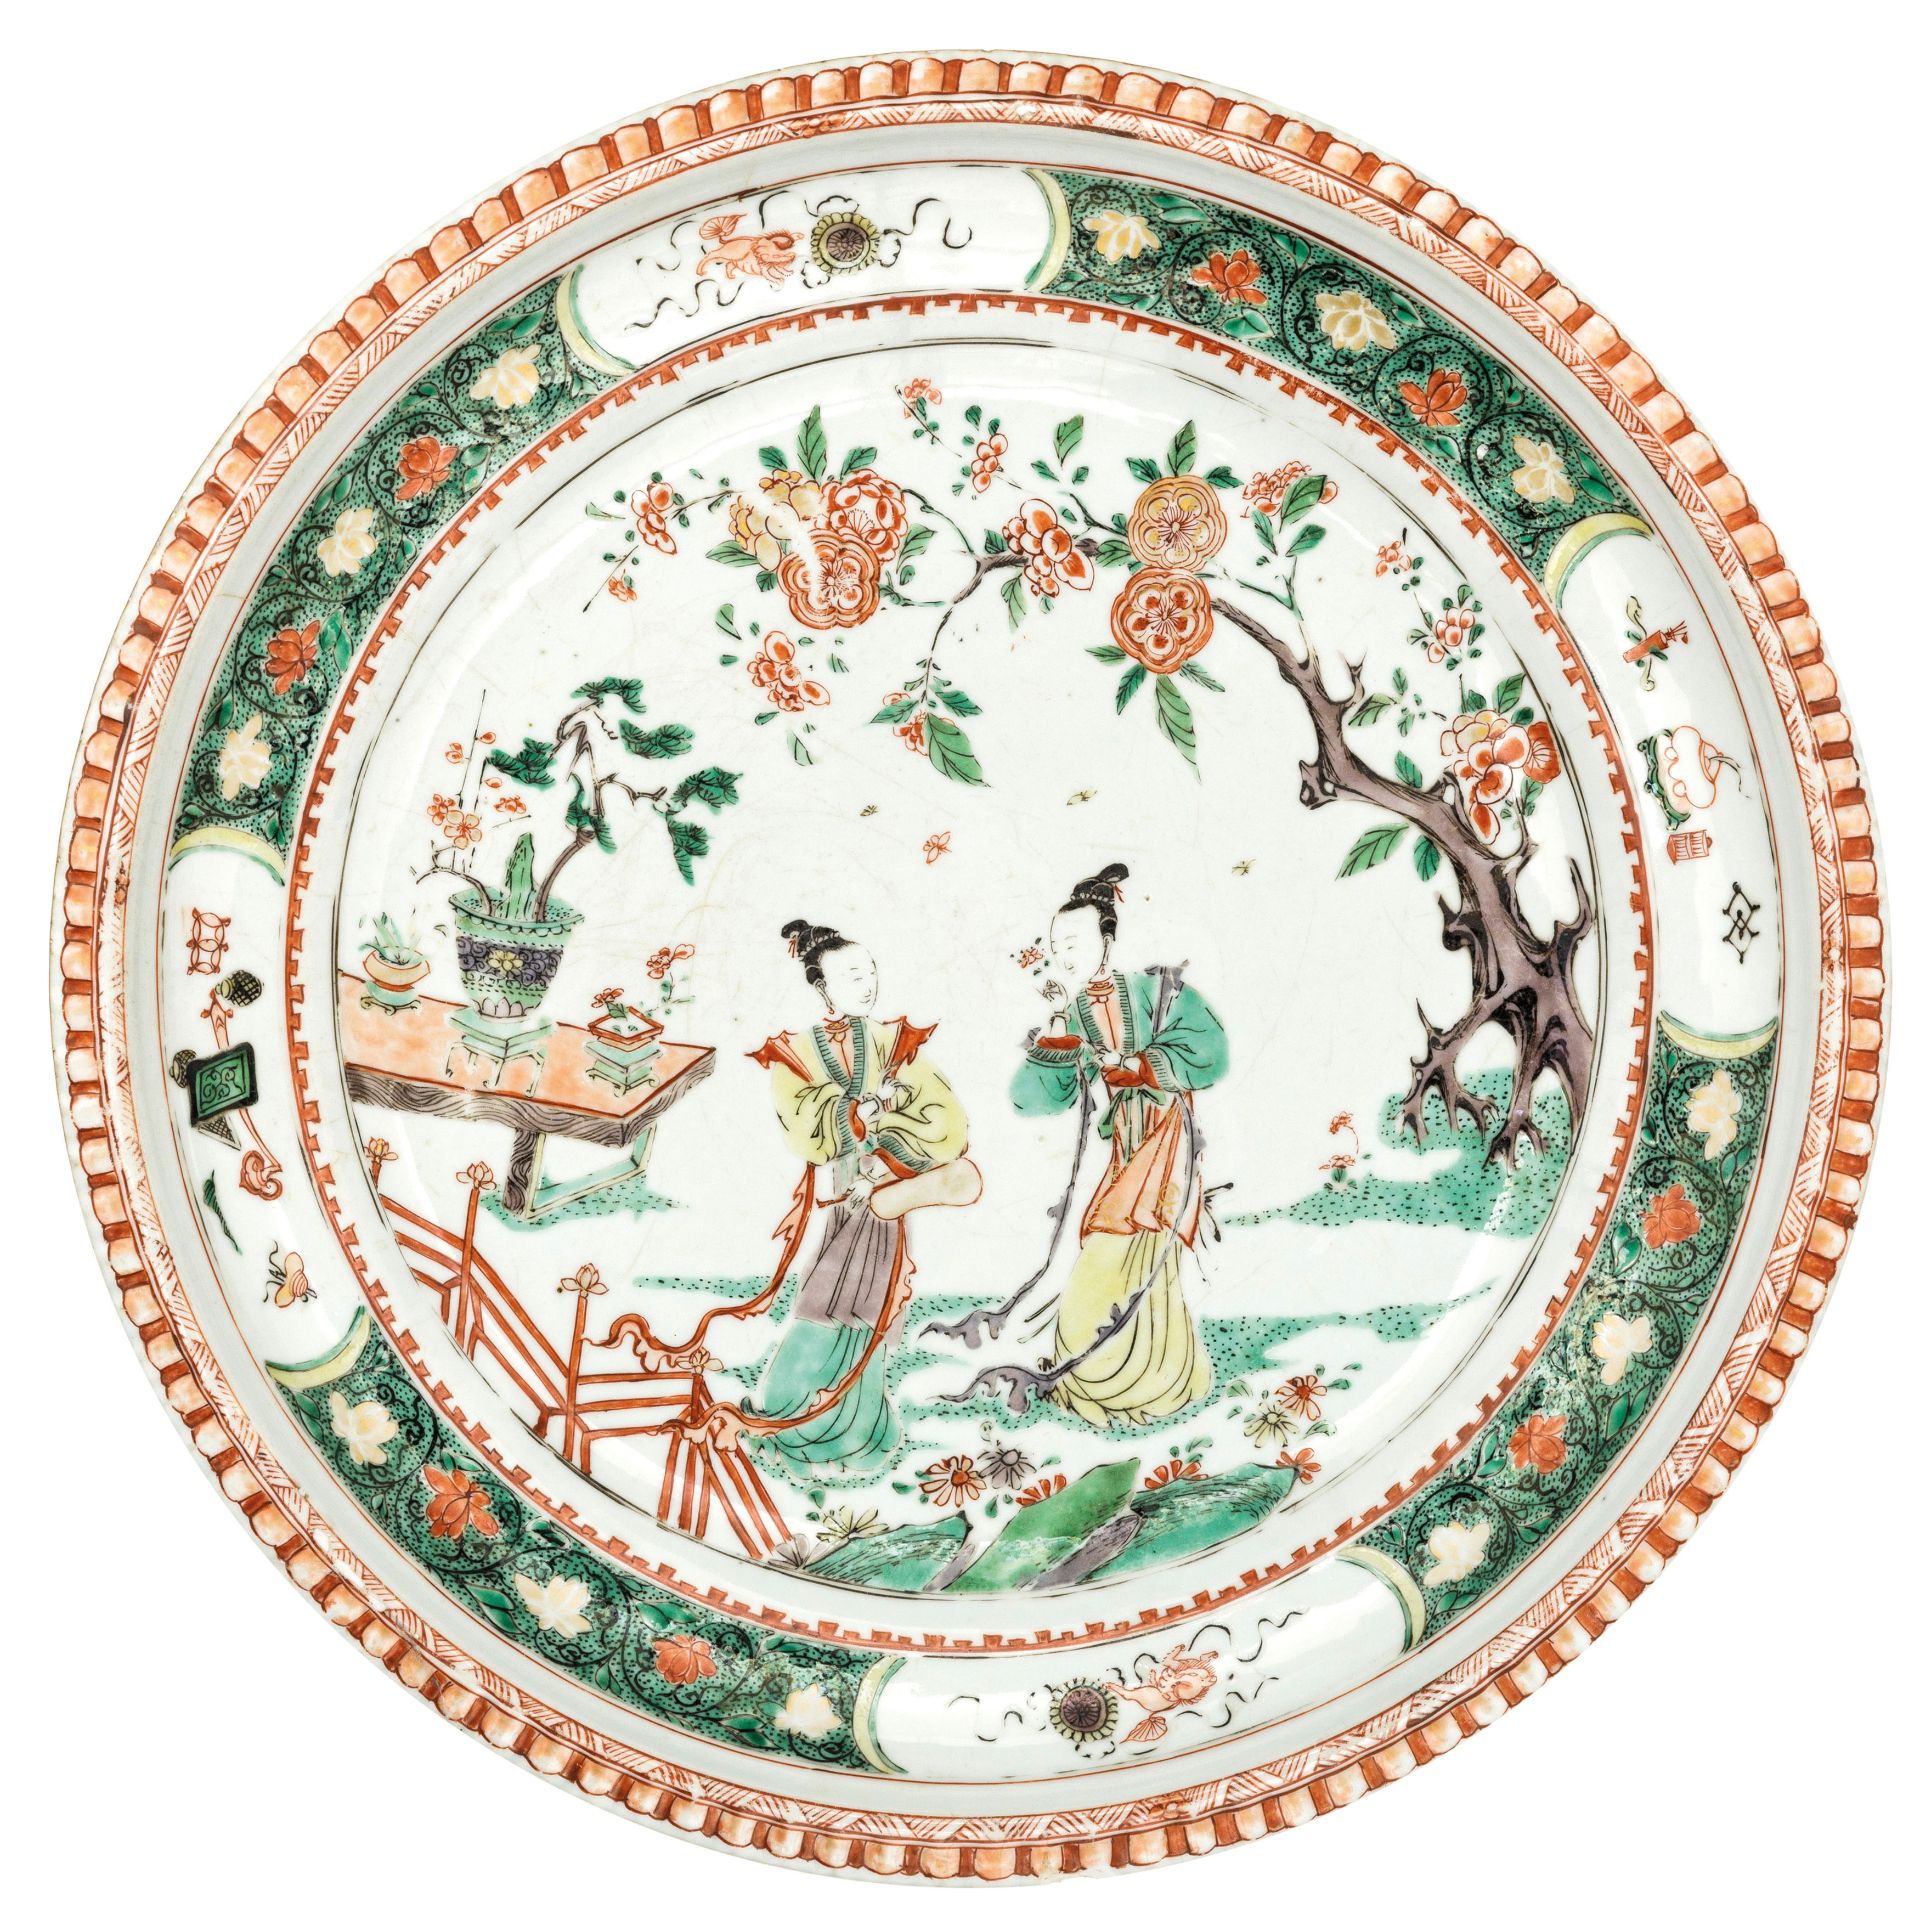 A VERY LARGE FAMILLE VERTE PORCELAIN DISHE WITH PIE CRUST RIM, CHINA, QING DYNASTY, KANGXI PERIOD